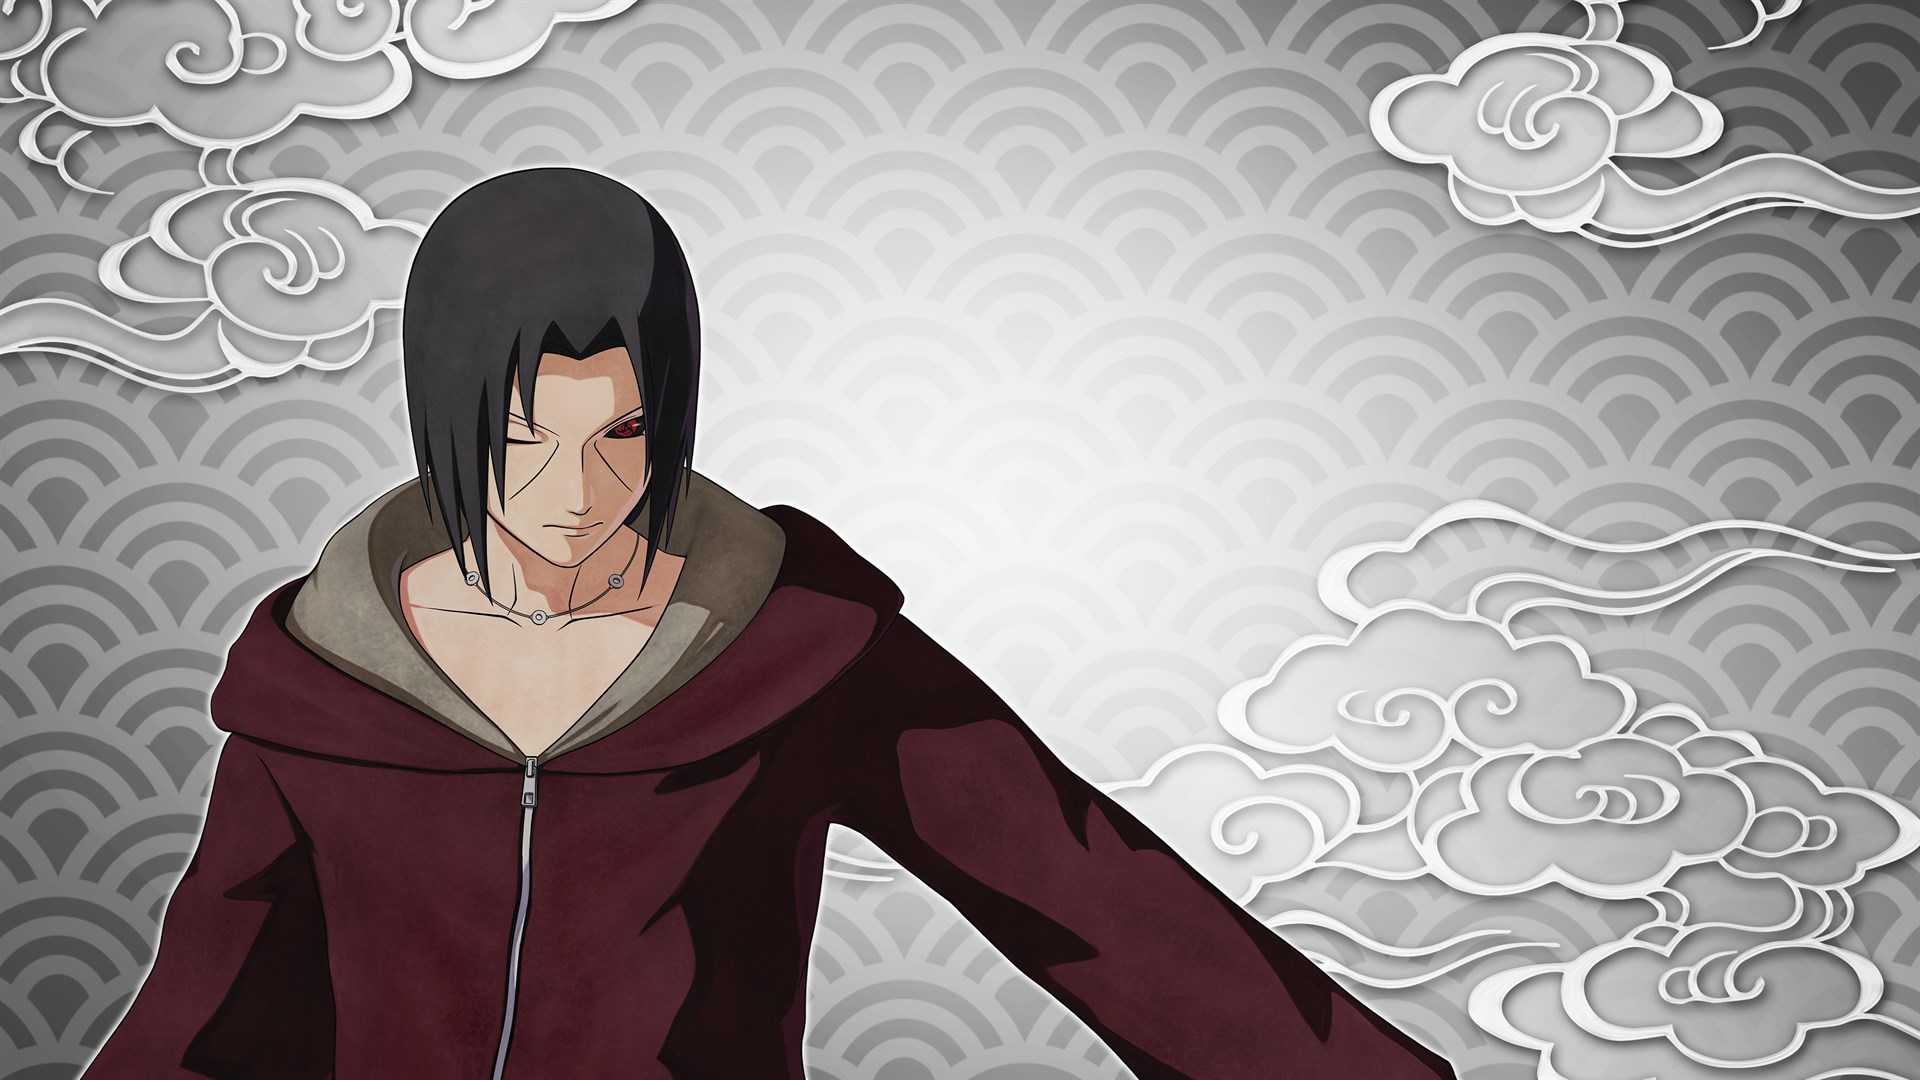 289+ Itachi Uchiha Wallpapers for iPhone and Android by Brandy Garner